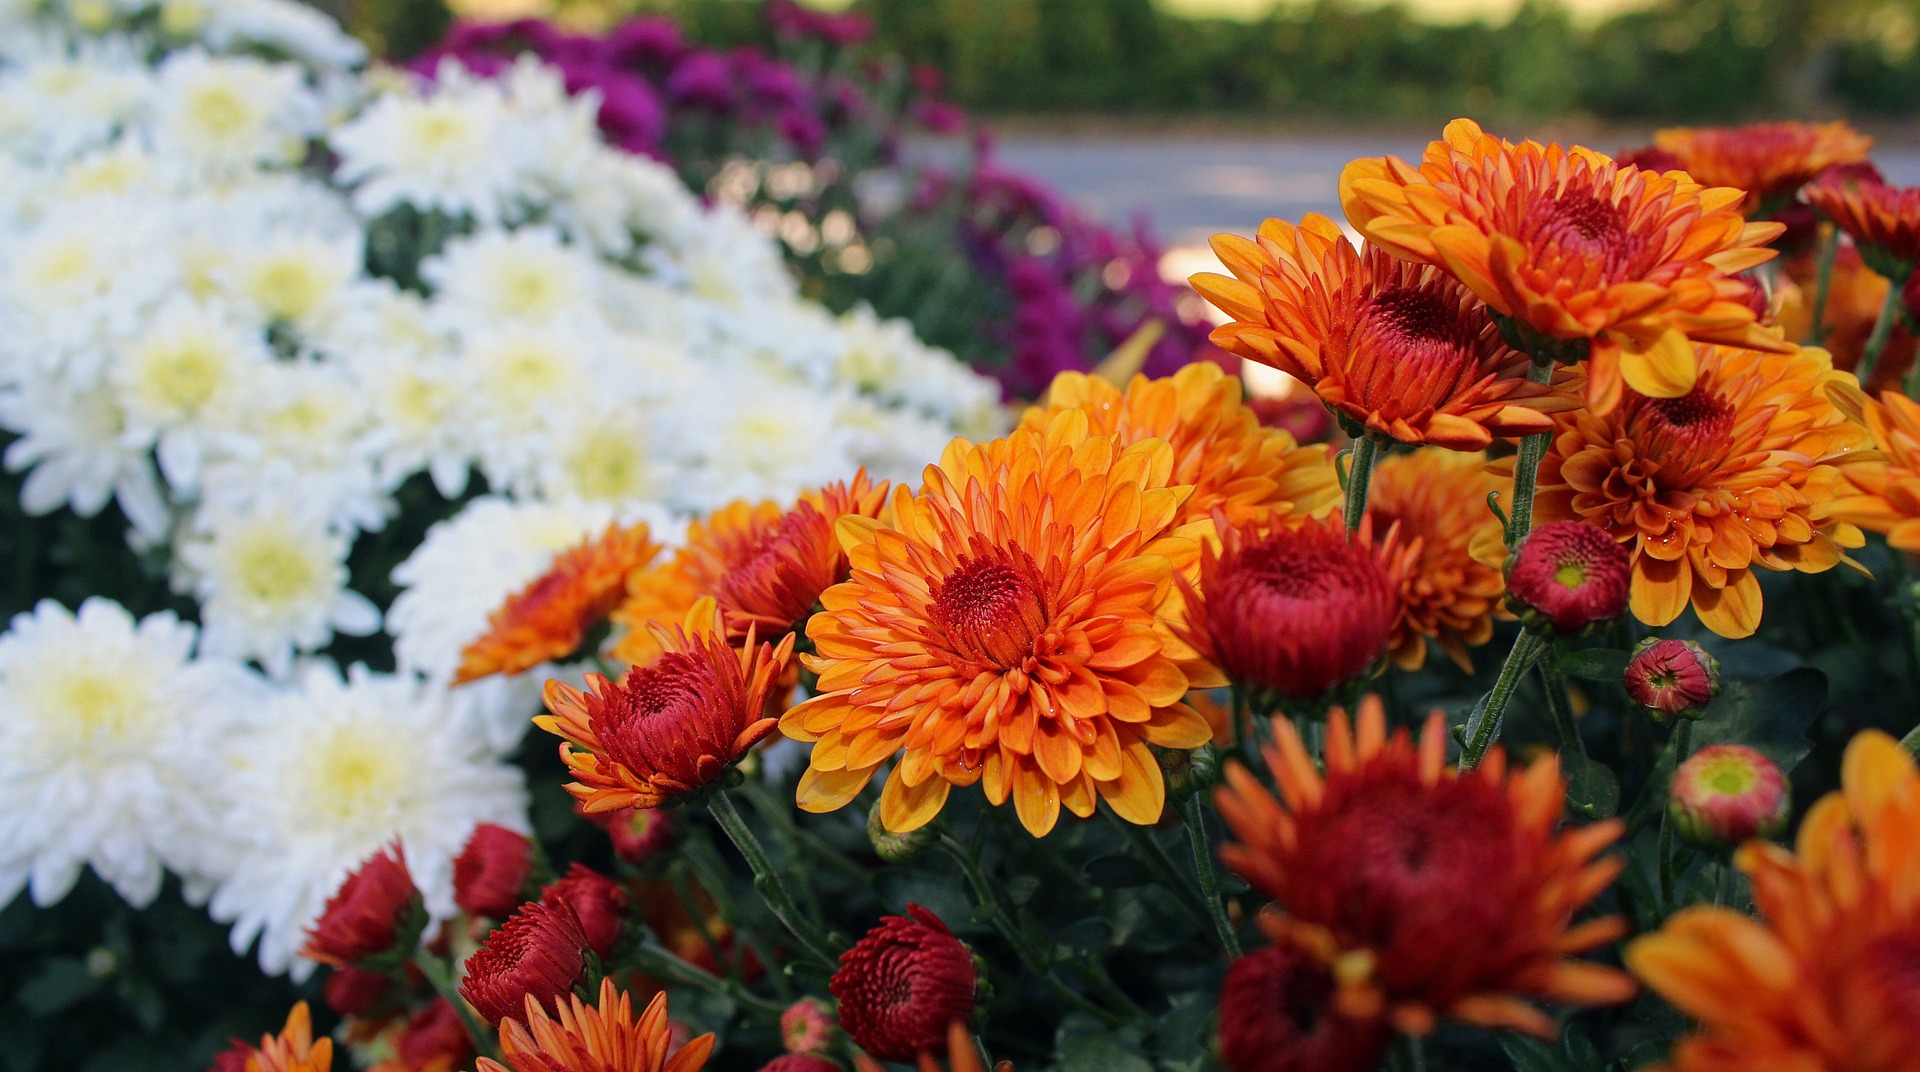 Chrysanthemums: When to Plant Mums | The Old Farmer's Almanac